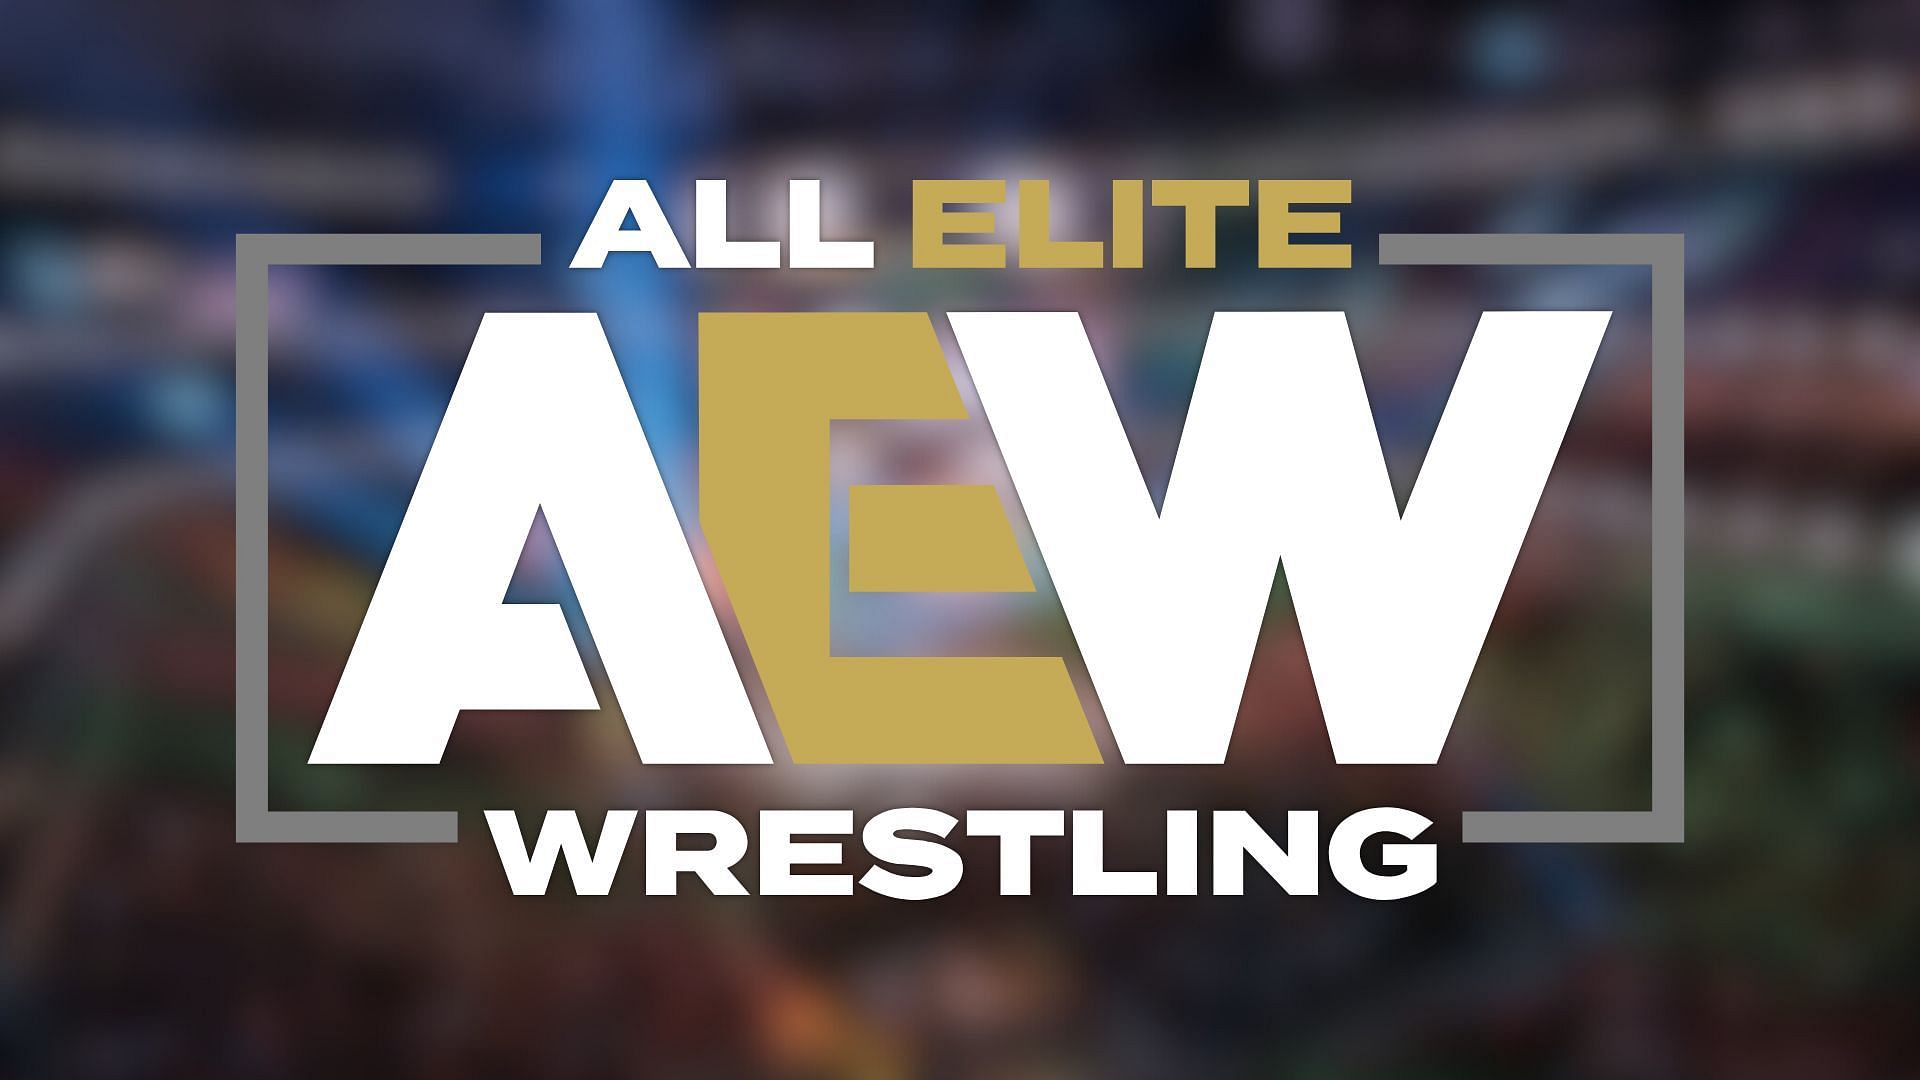 Which AEW star wants to wrestle until they are 80?